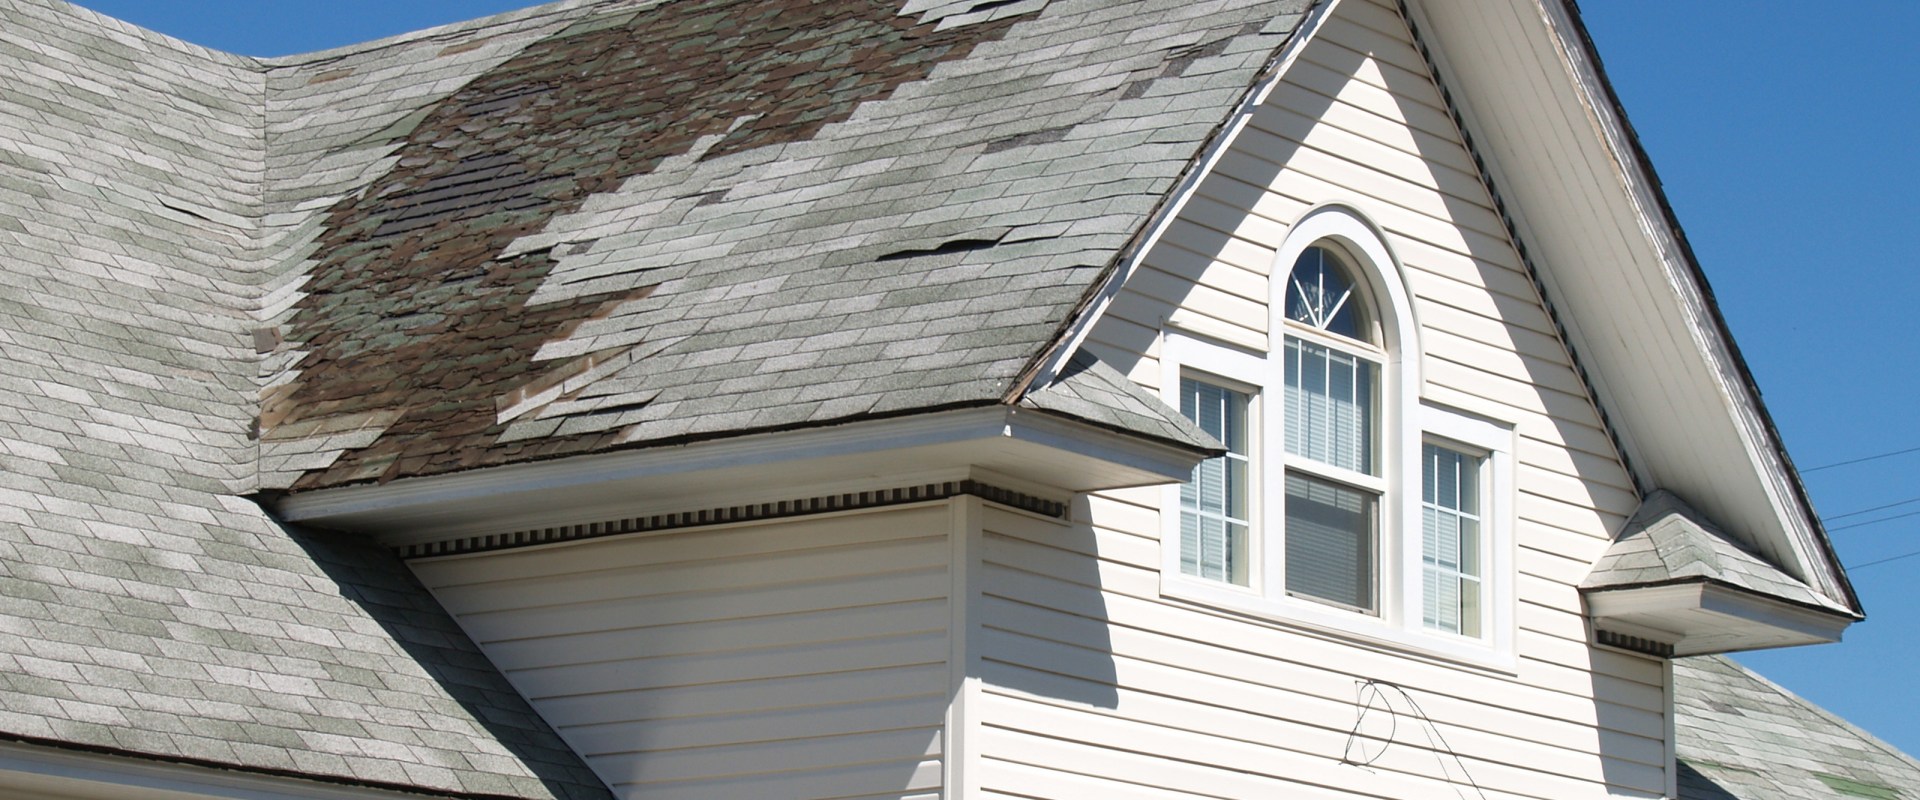 Repairing or Replacing Damaged Areas on Your Roof and Siding